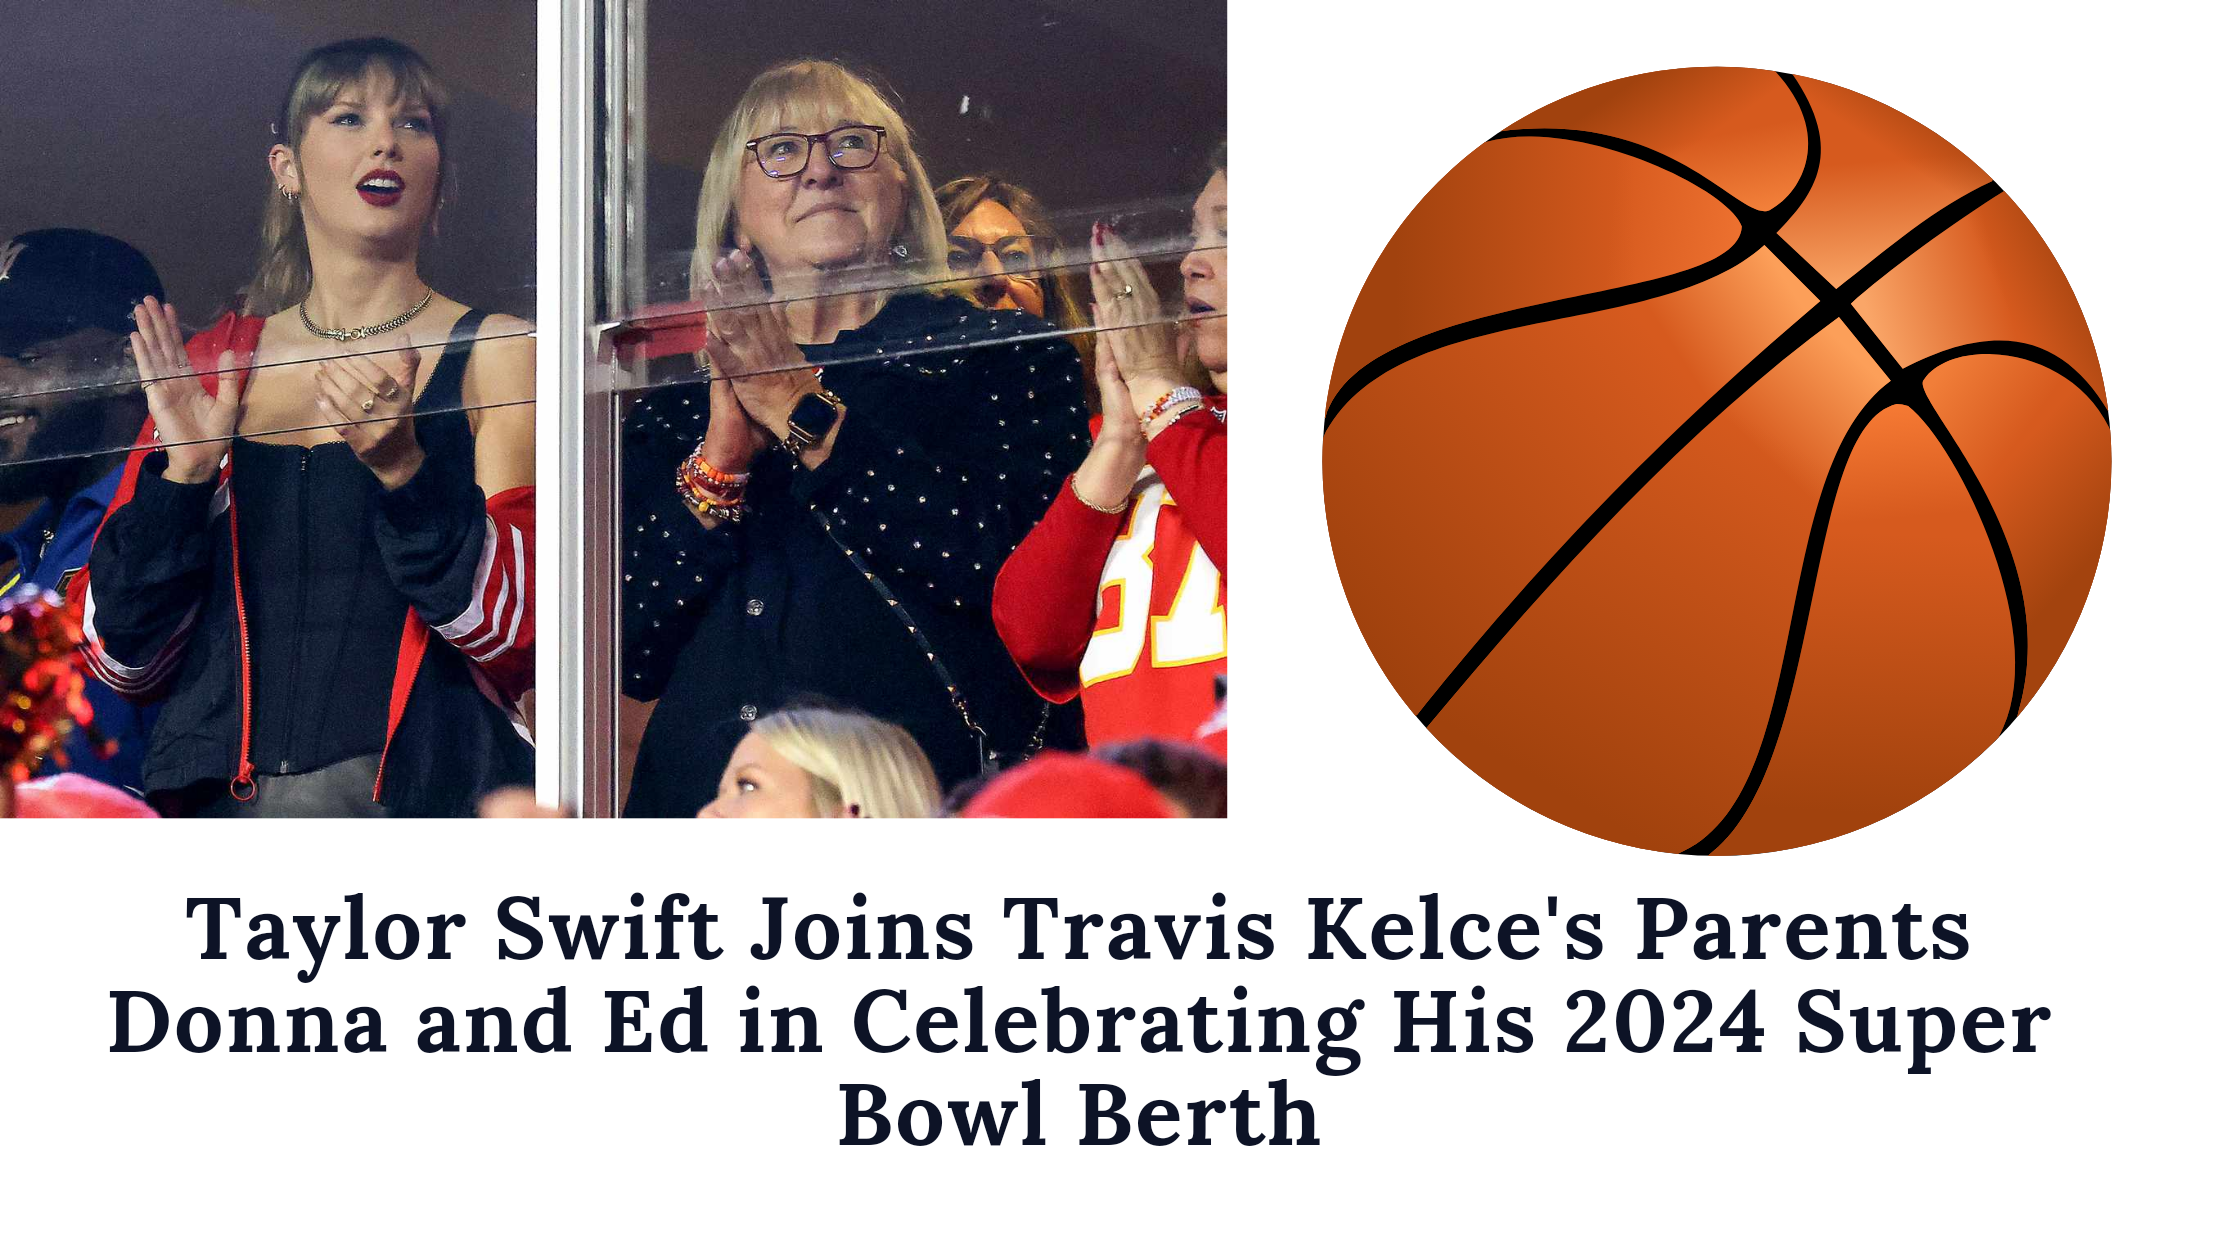 Taylor Swift Joins Travis Kelce's Parents Donna and Ed in Celebrating His 2024 Super Bowl Berth